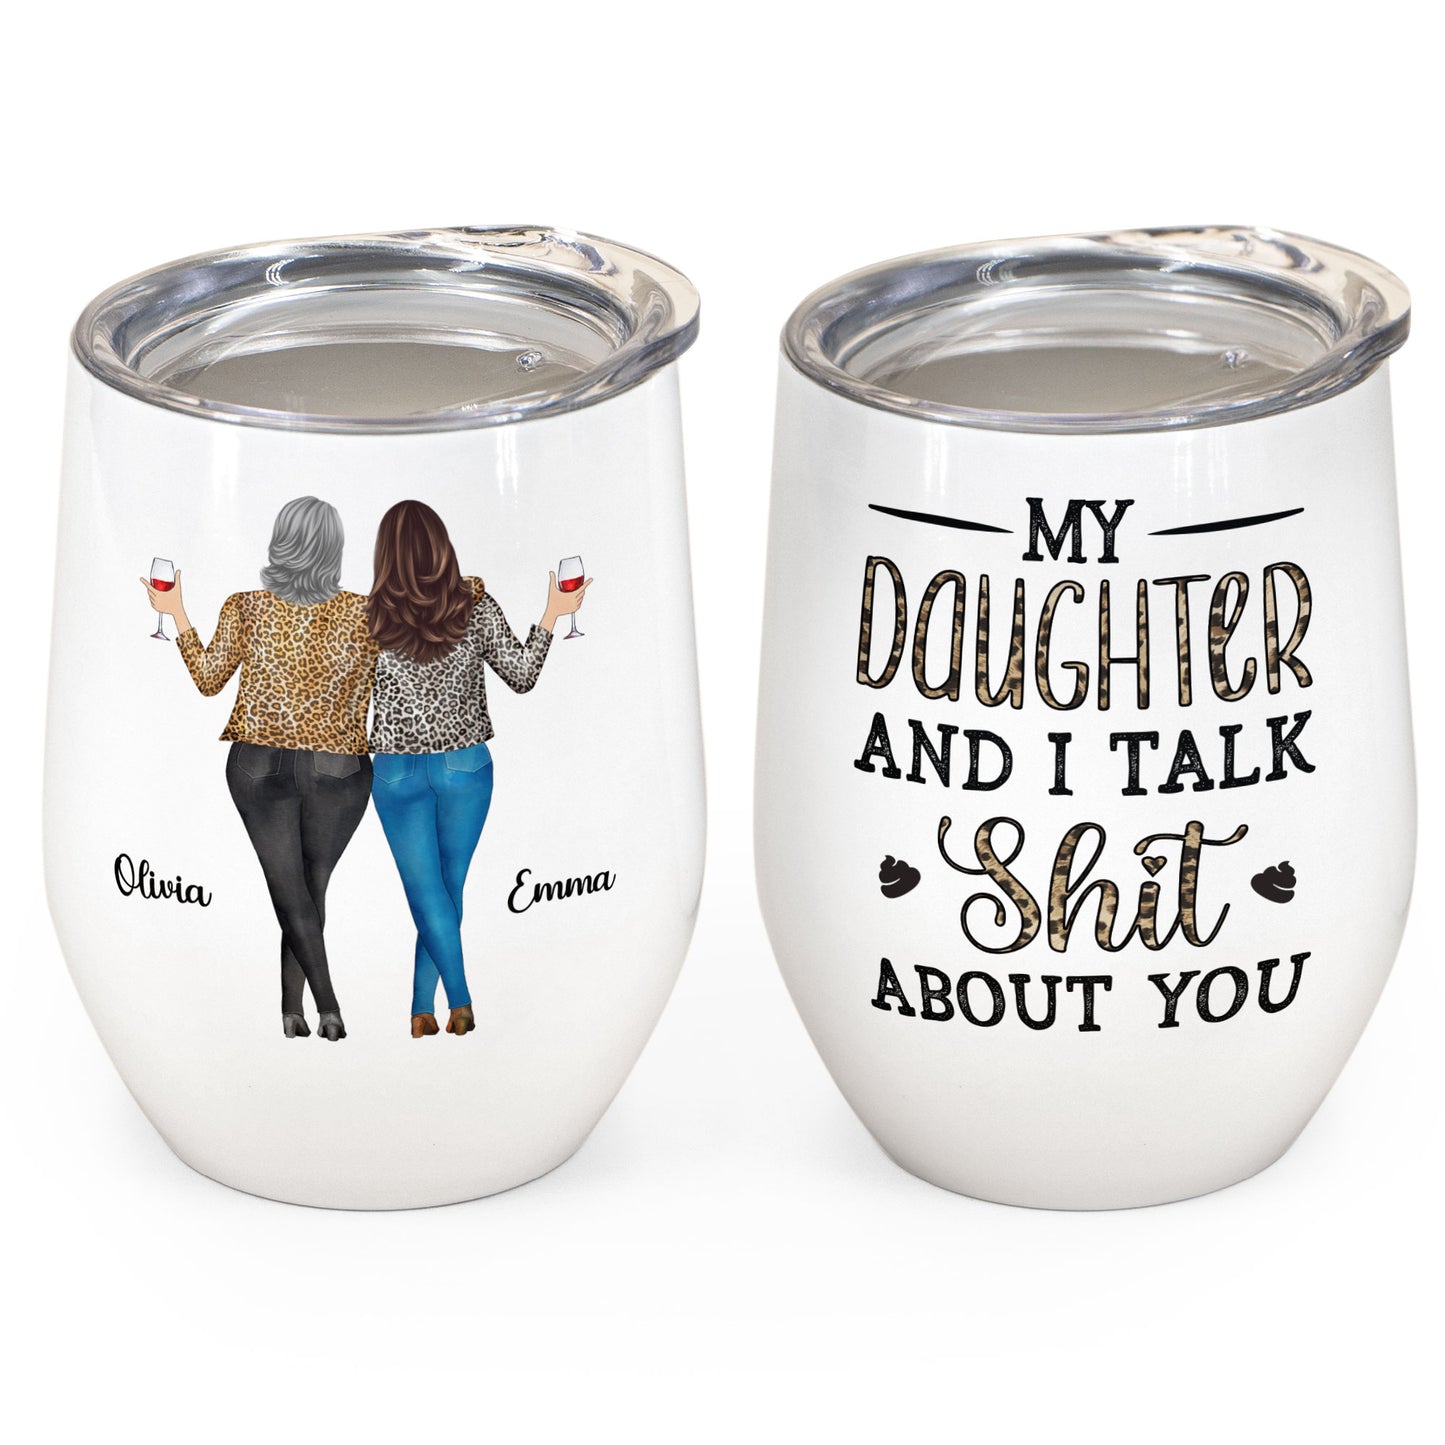 My Daughter & I Talk About You - Personalized Wine Tumbler - Gift For Mother, Daughter